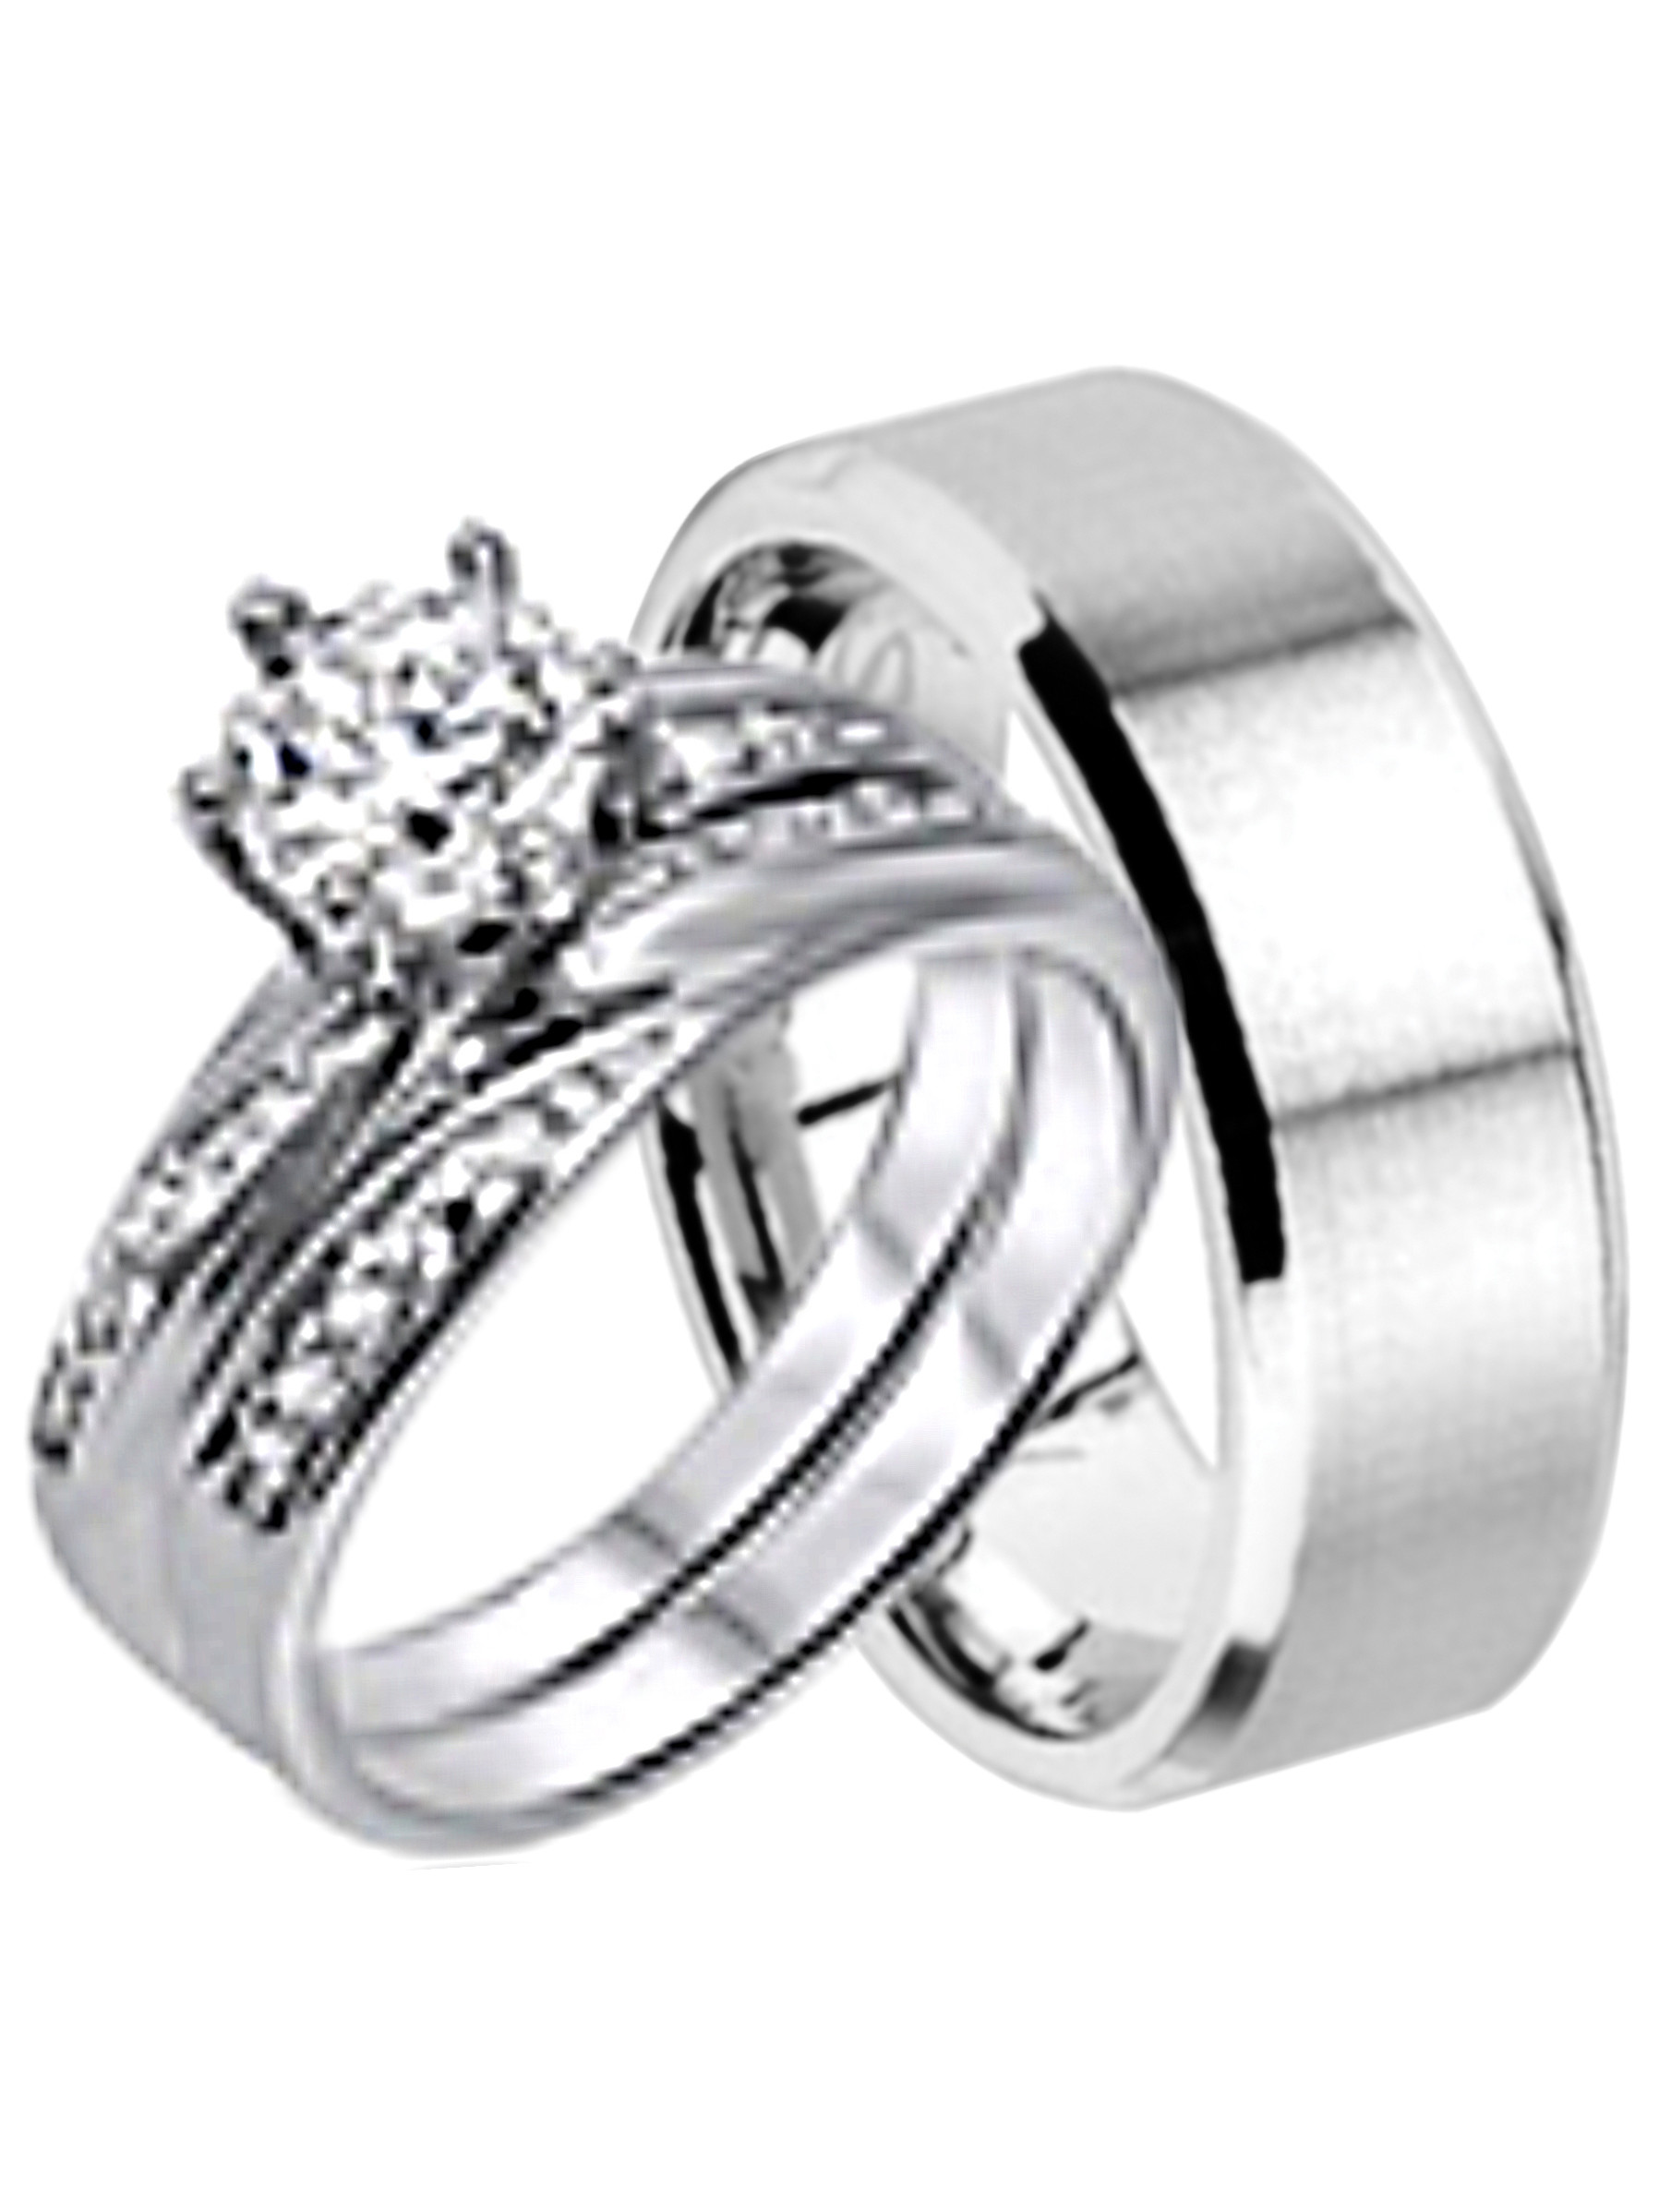 Wedding Band Sets For Him And Her
 His and Hers Wedding Ring Set Matching Wedding Bands for